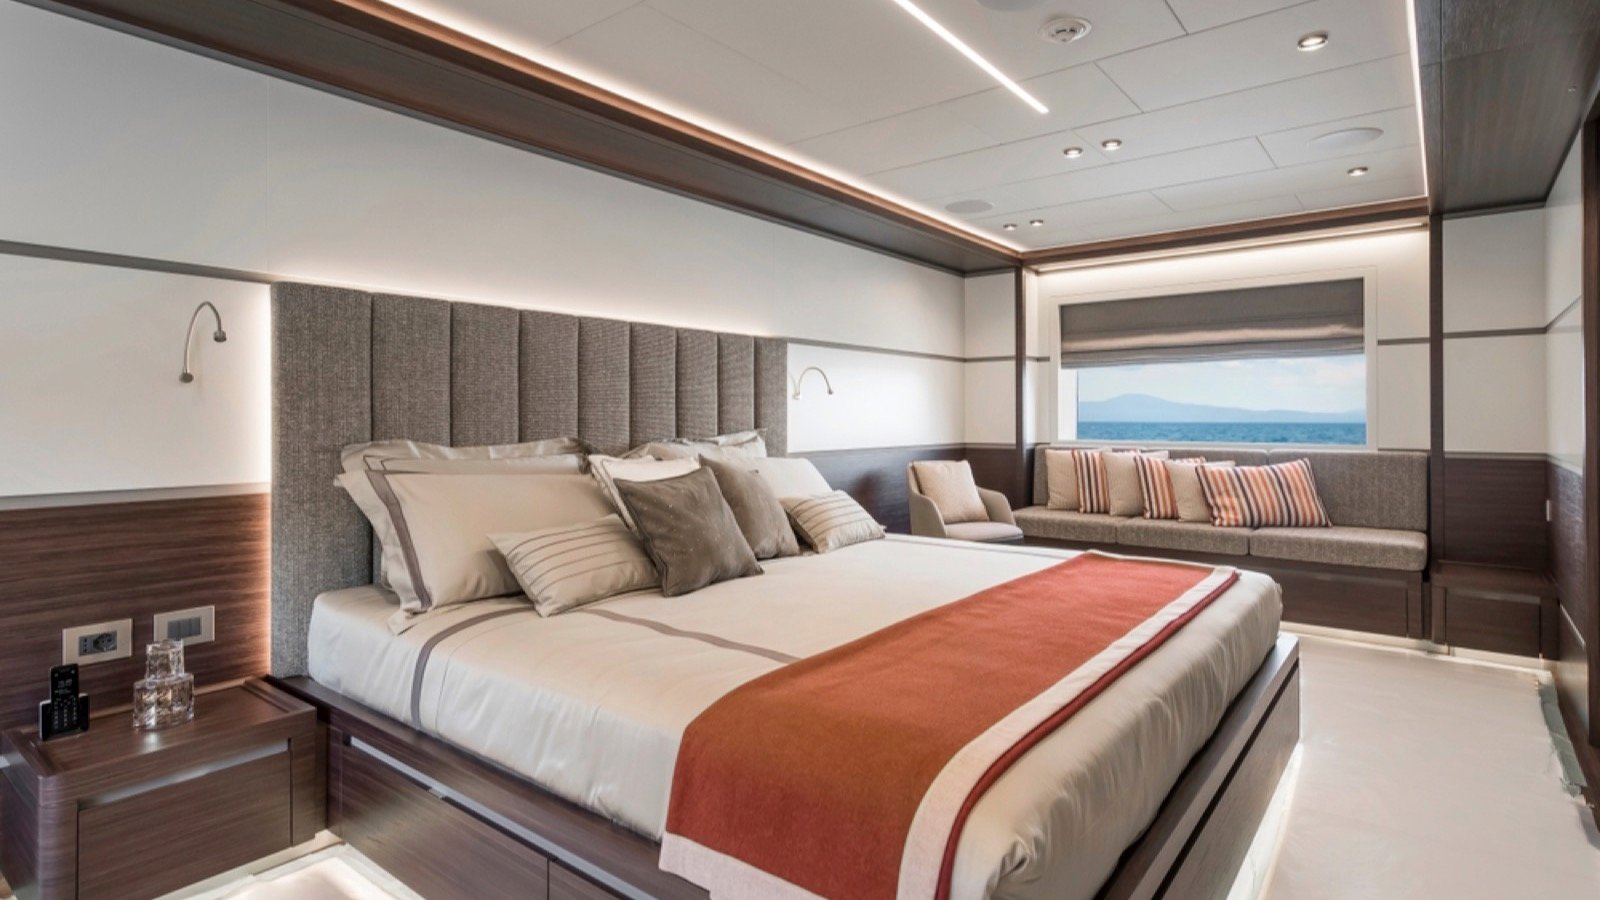 <p>Traverse from Cape Town to Athens over 64 days for $215,200 per person in the Grand Suite of the Silversea Silver Spirit. This suite offers up to 1,532 square feet of space, featuring a king-size bed, a writing desk, and luxury mattresses, all catered to by a personal butler. This suite ensures you travel in comfort, complete with an espresso machine, plush bathrobes, and the world’s most comfortable slippers, available in one-bedroom or two-bedroom configurations.</p>